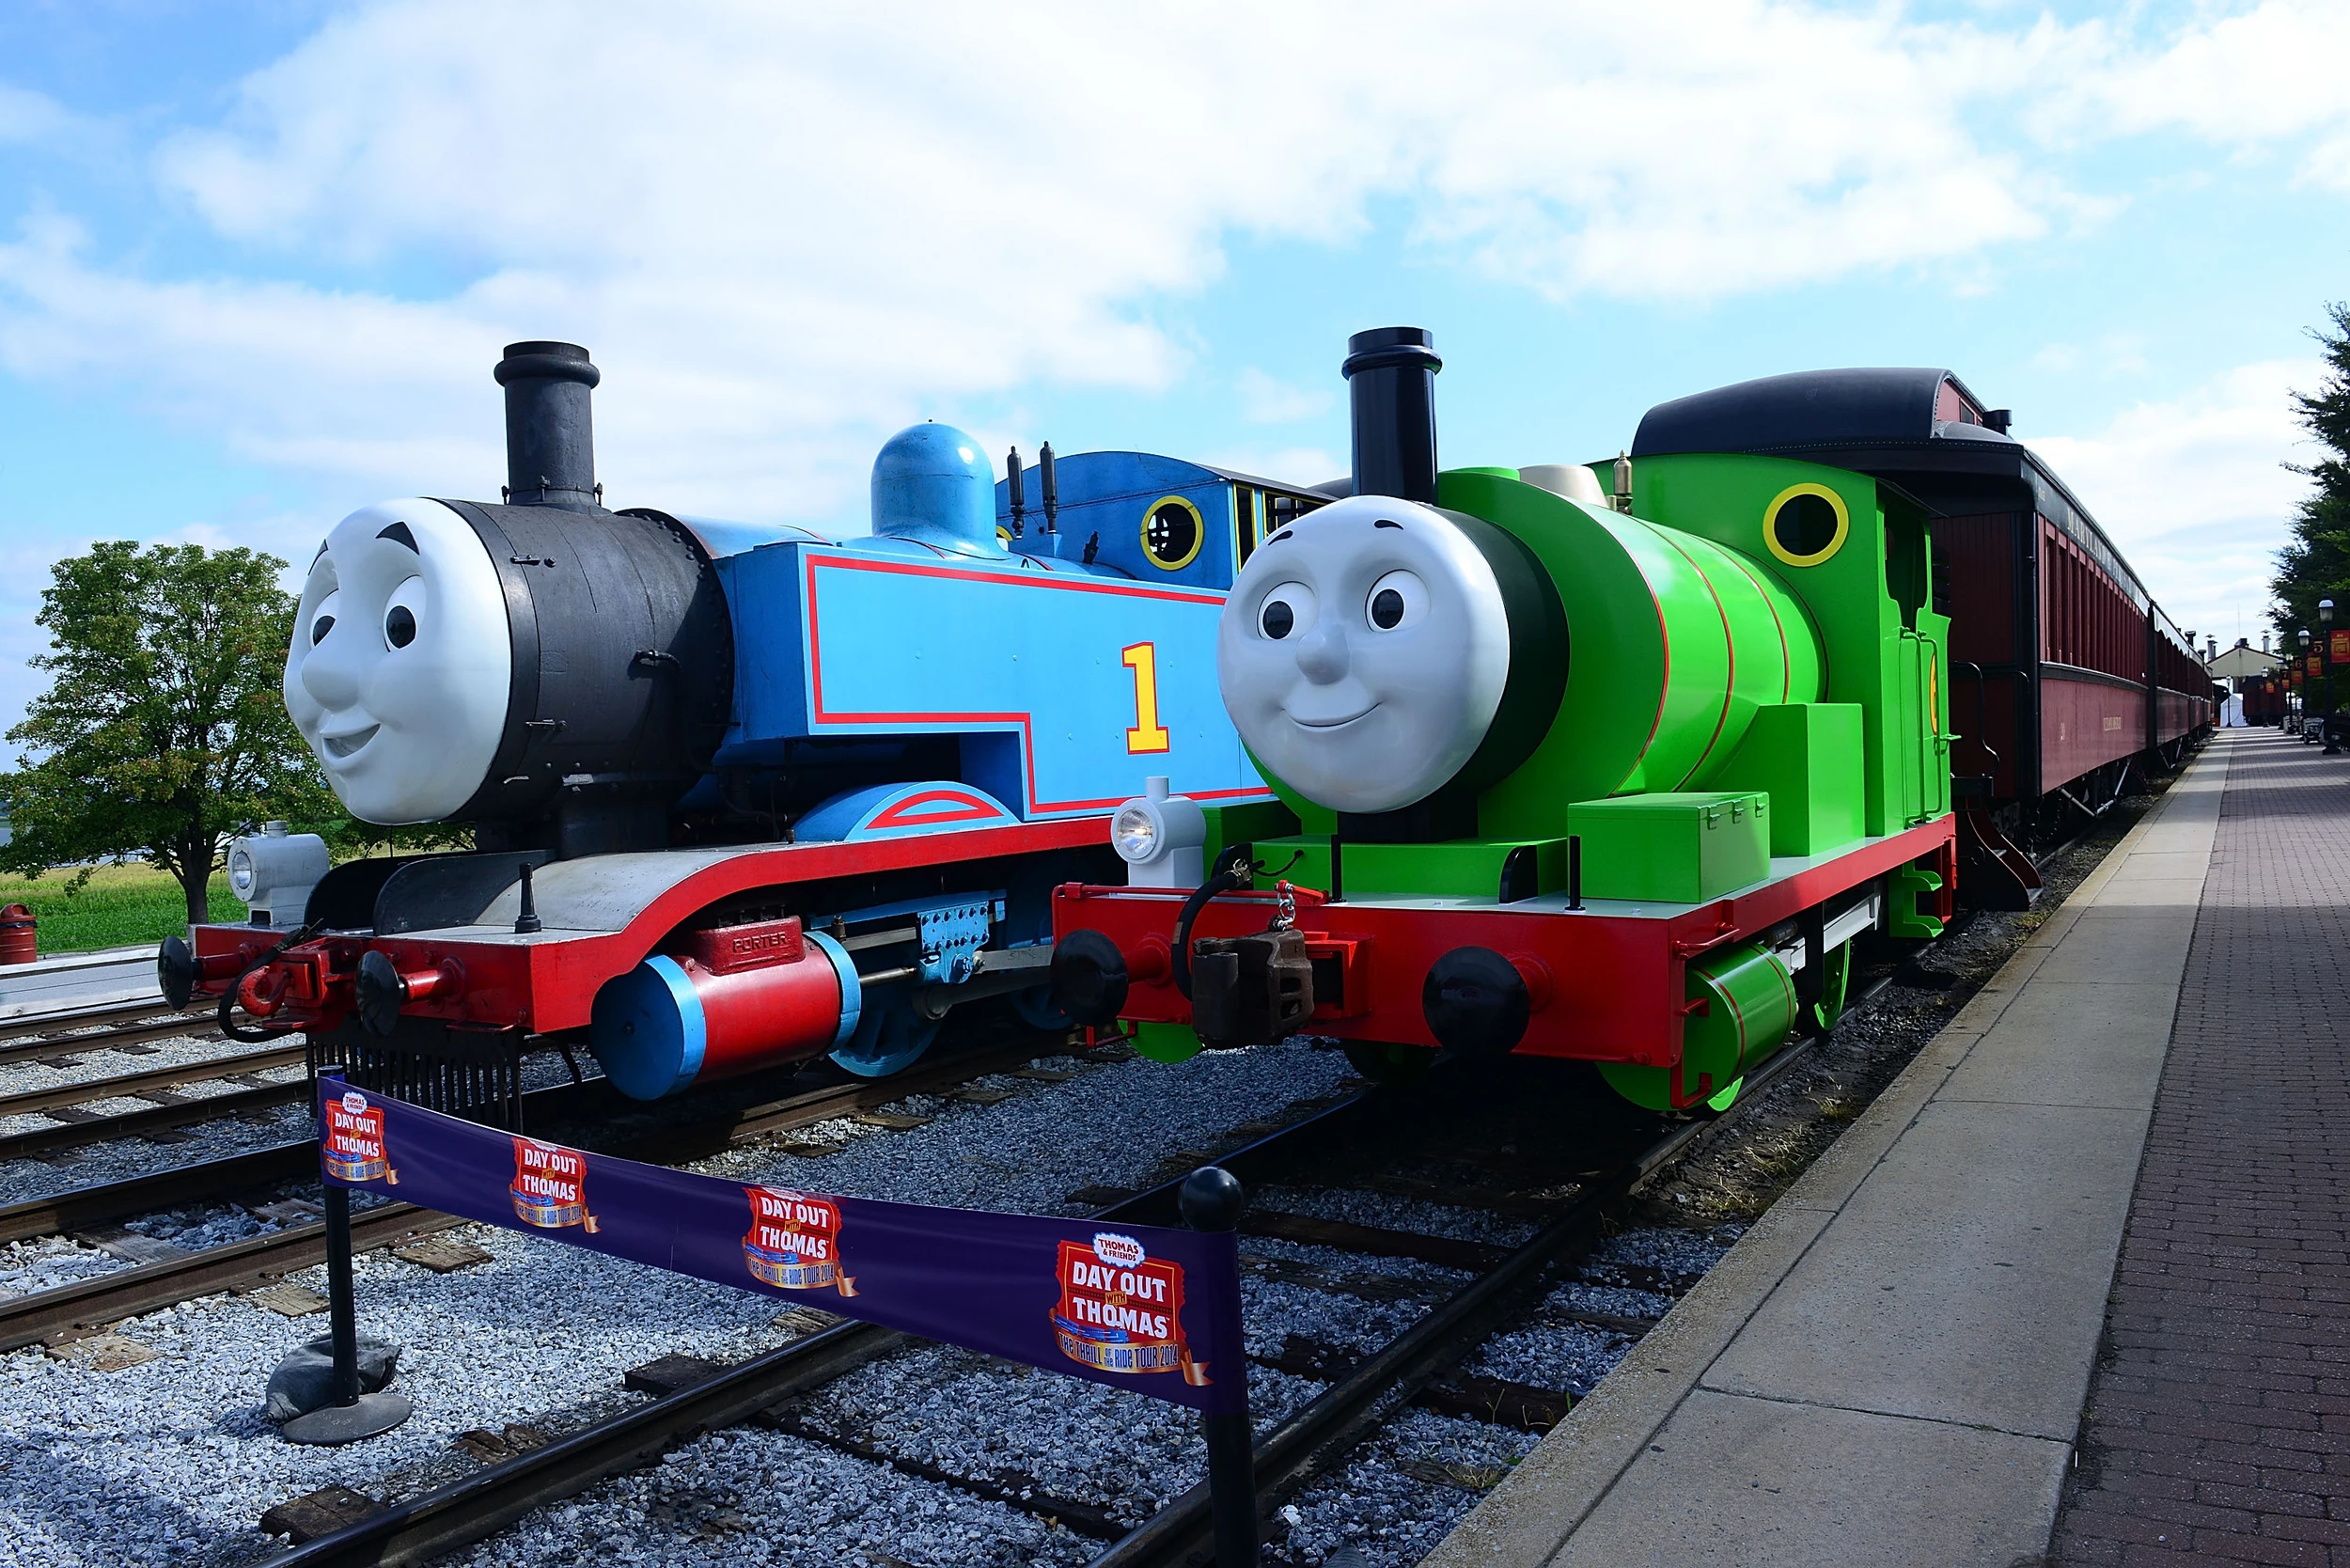 Day Out With Thomas: The Thrill Of The Ride Tour 2014 Goes Green As Thomas The Tank Engine's Best Friend Percy Makes North American Debut